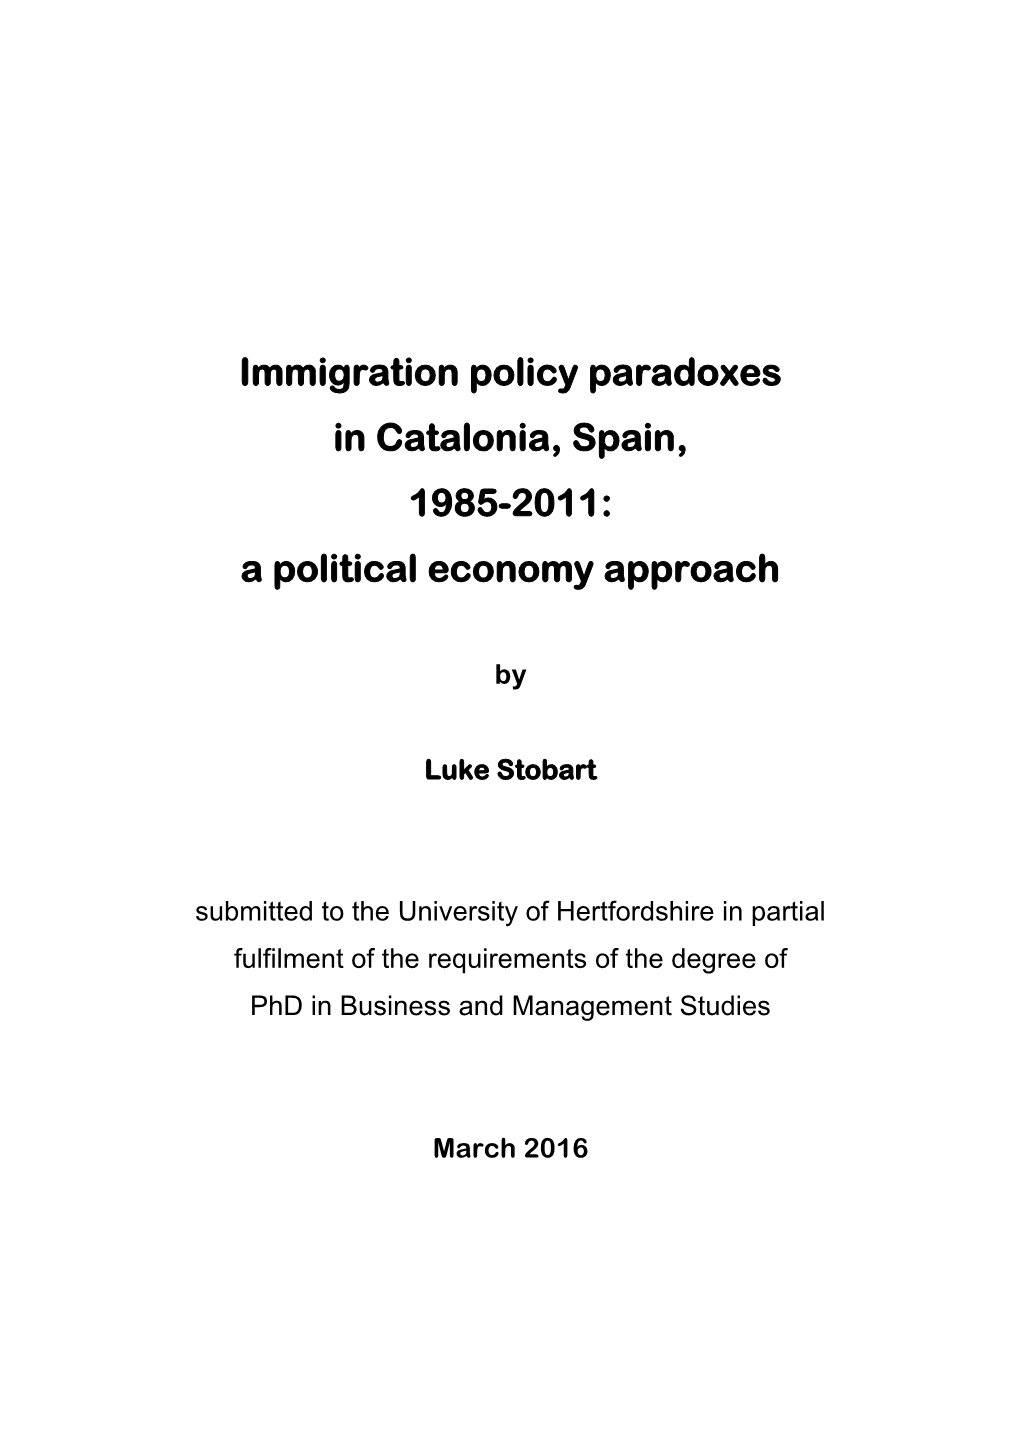 Immigration Policy Paradoxes in Catalonia, Spain, 1985-2011: a Political Economy Approach